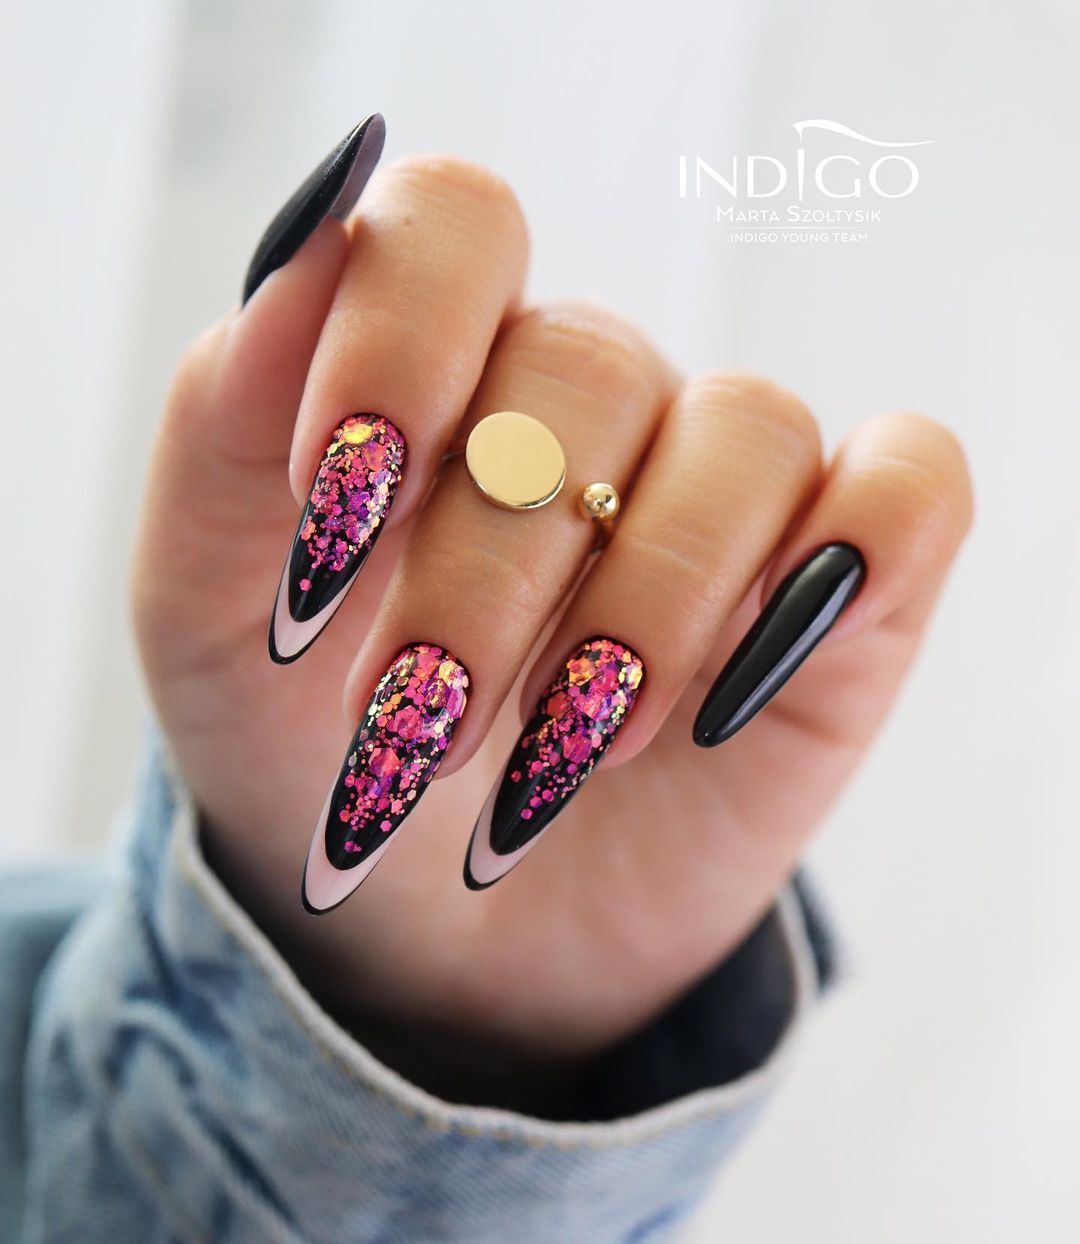 Black Long Almond Nails with Glitter